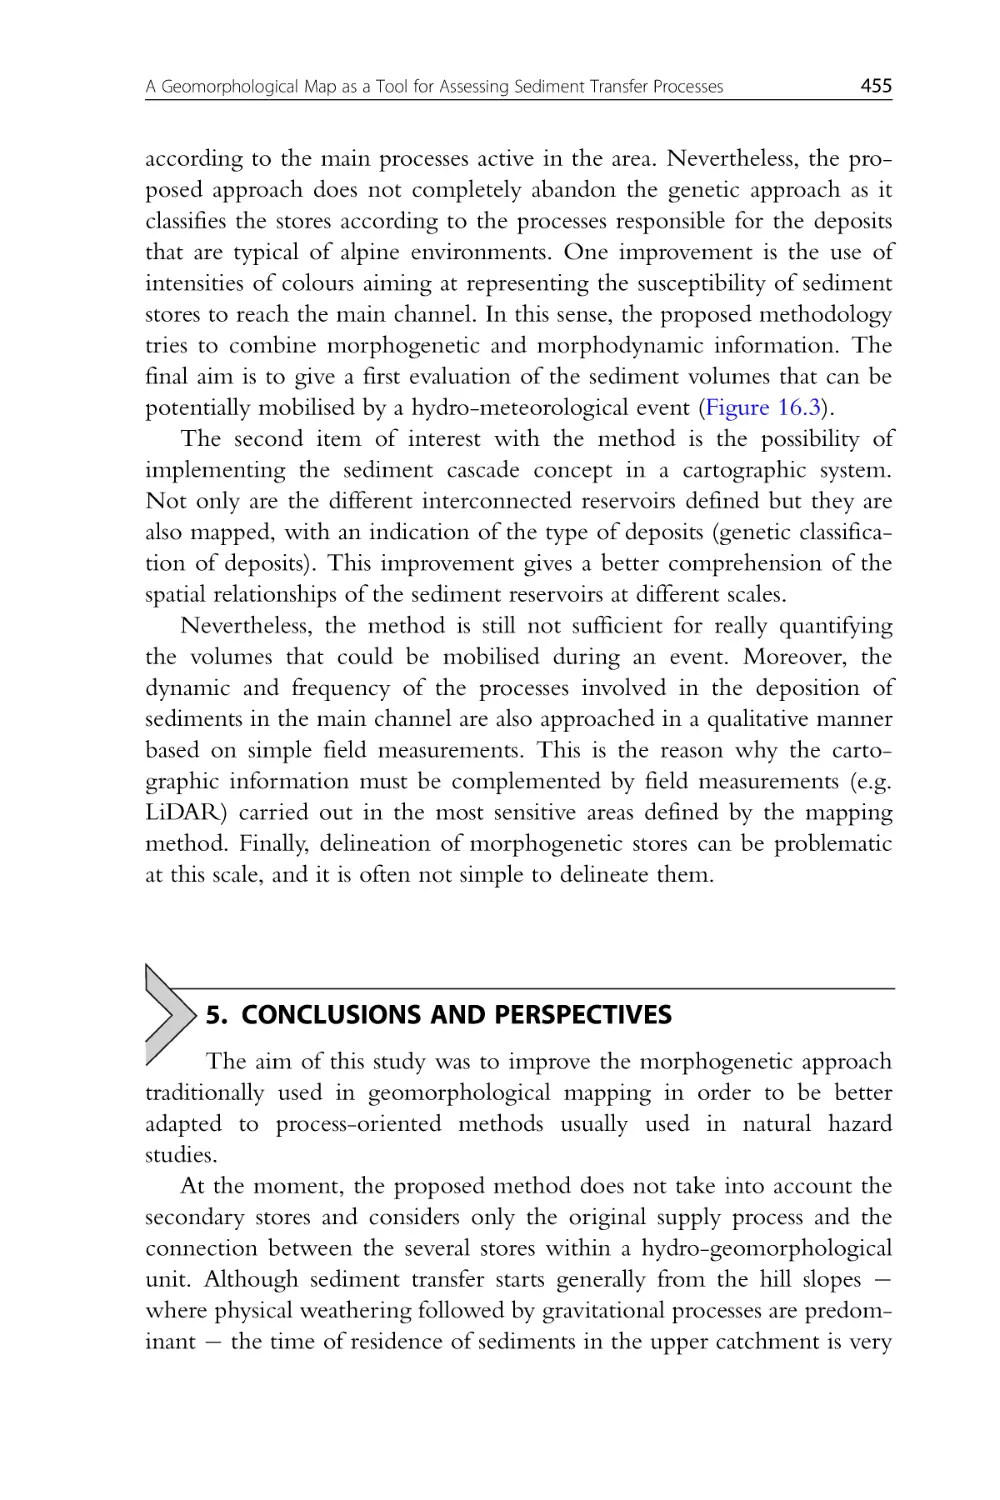 5. Conclusions and Perspectives